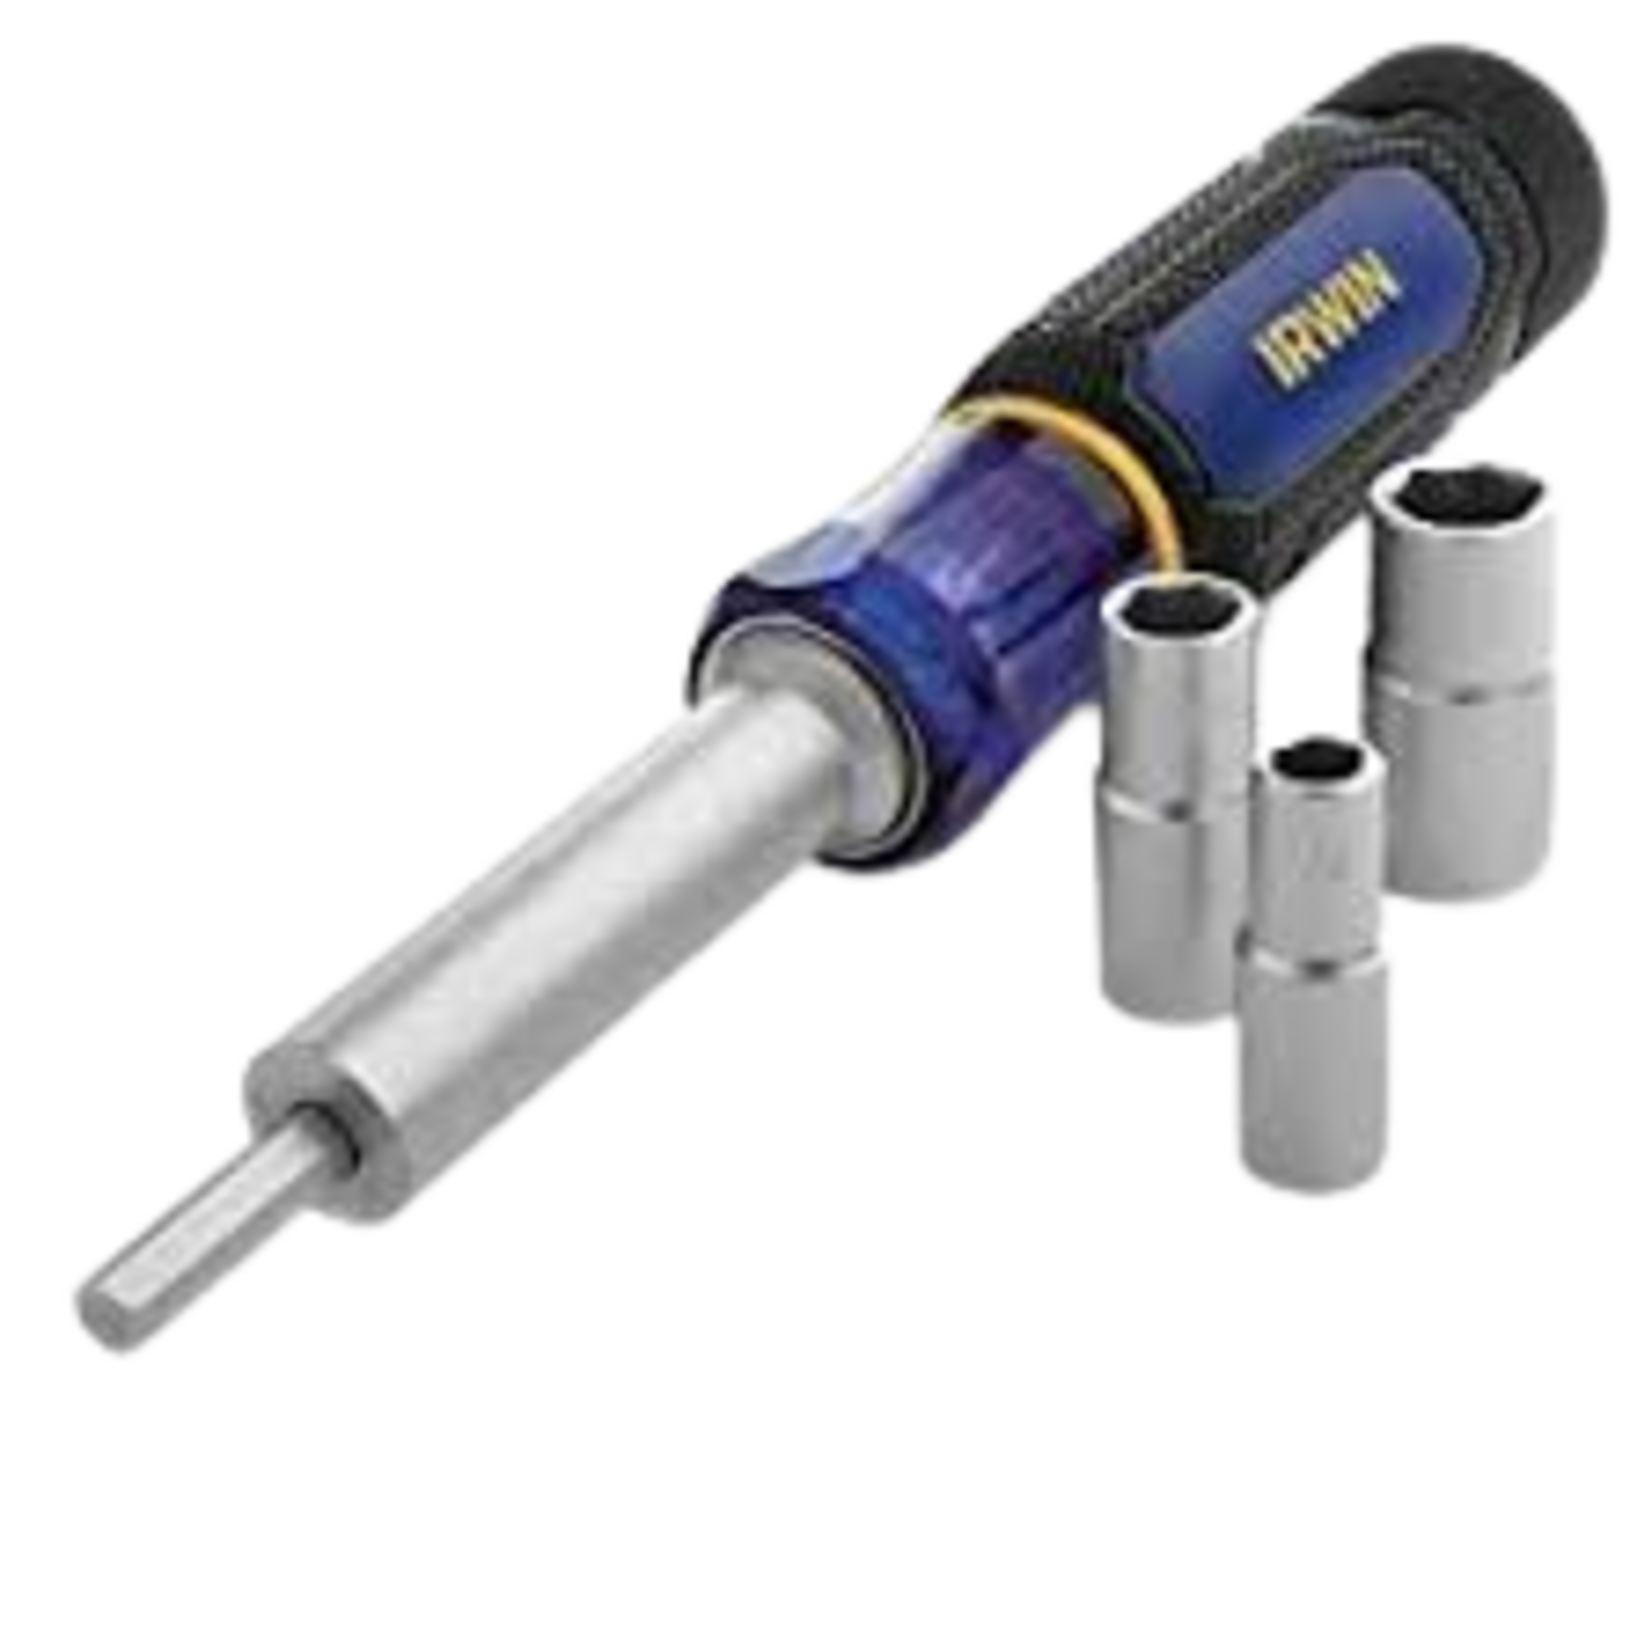 IRWIN 6in1 NUT DRIVER SAE